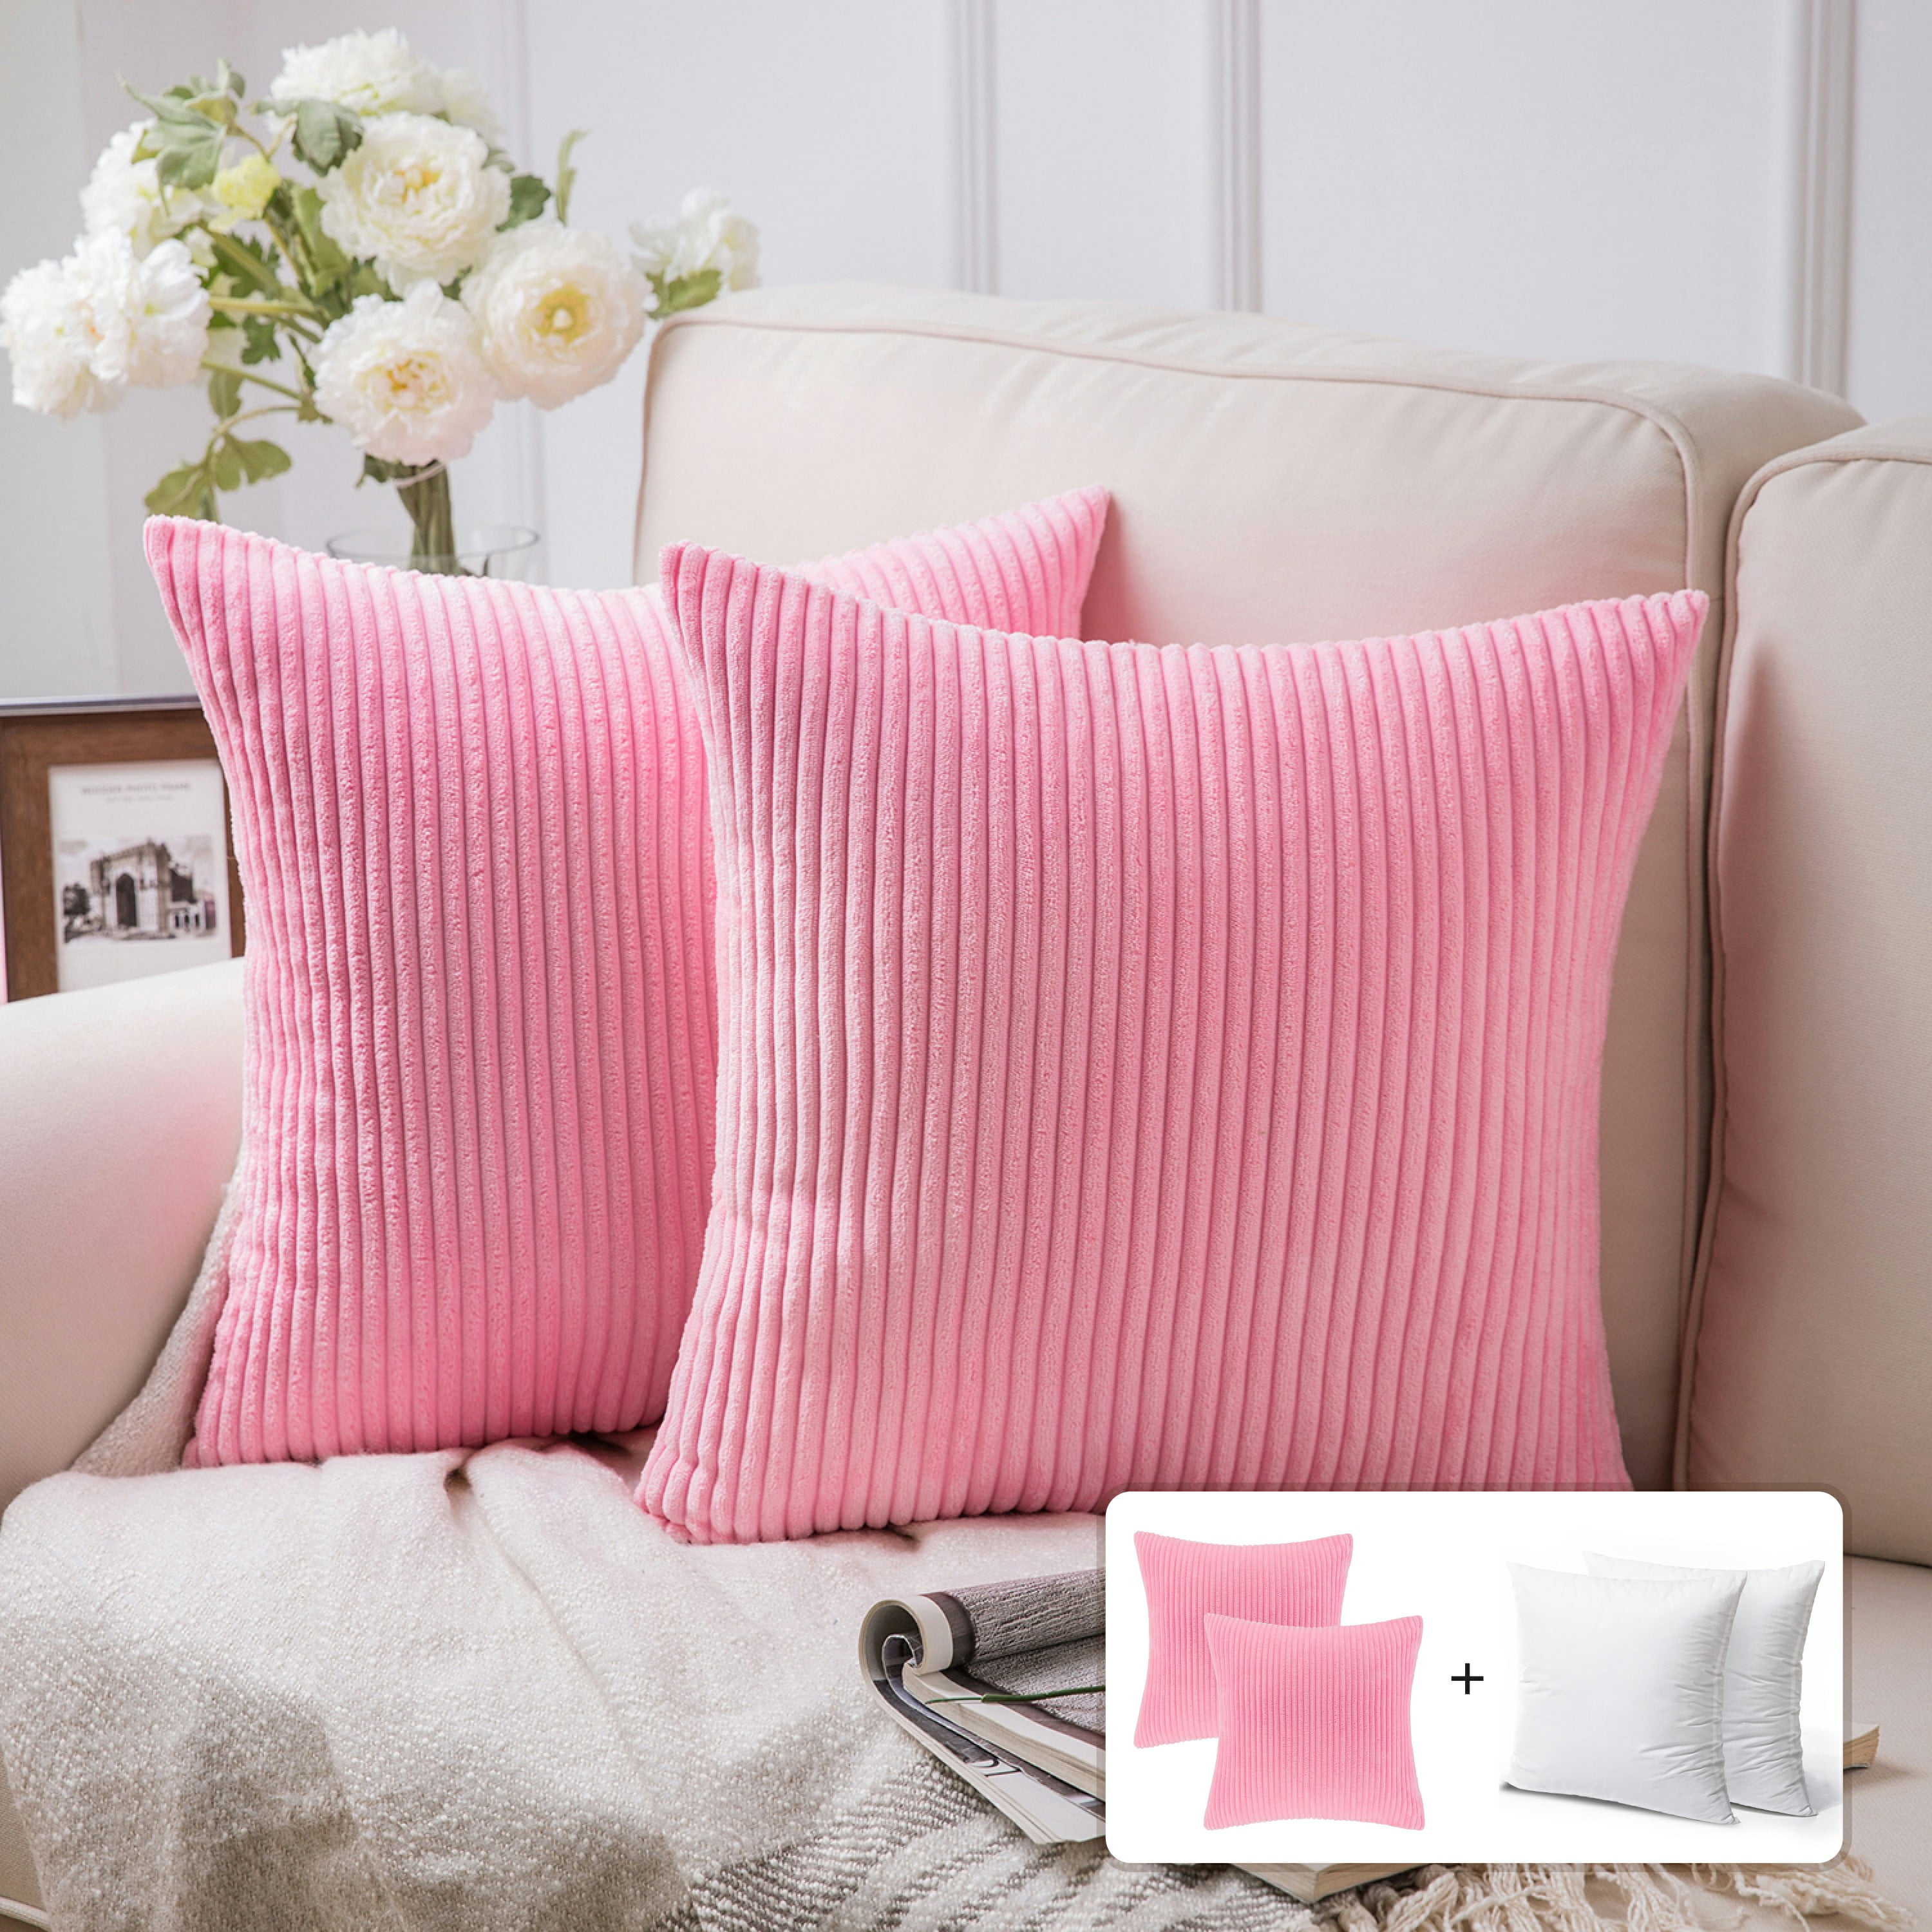 KEZHUYING Creative Heart Pattern (18 x 18 inch) Square Plush Polyester Decorative Pillow